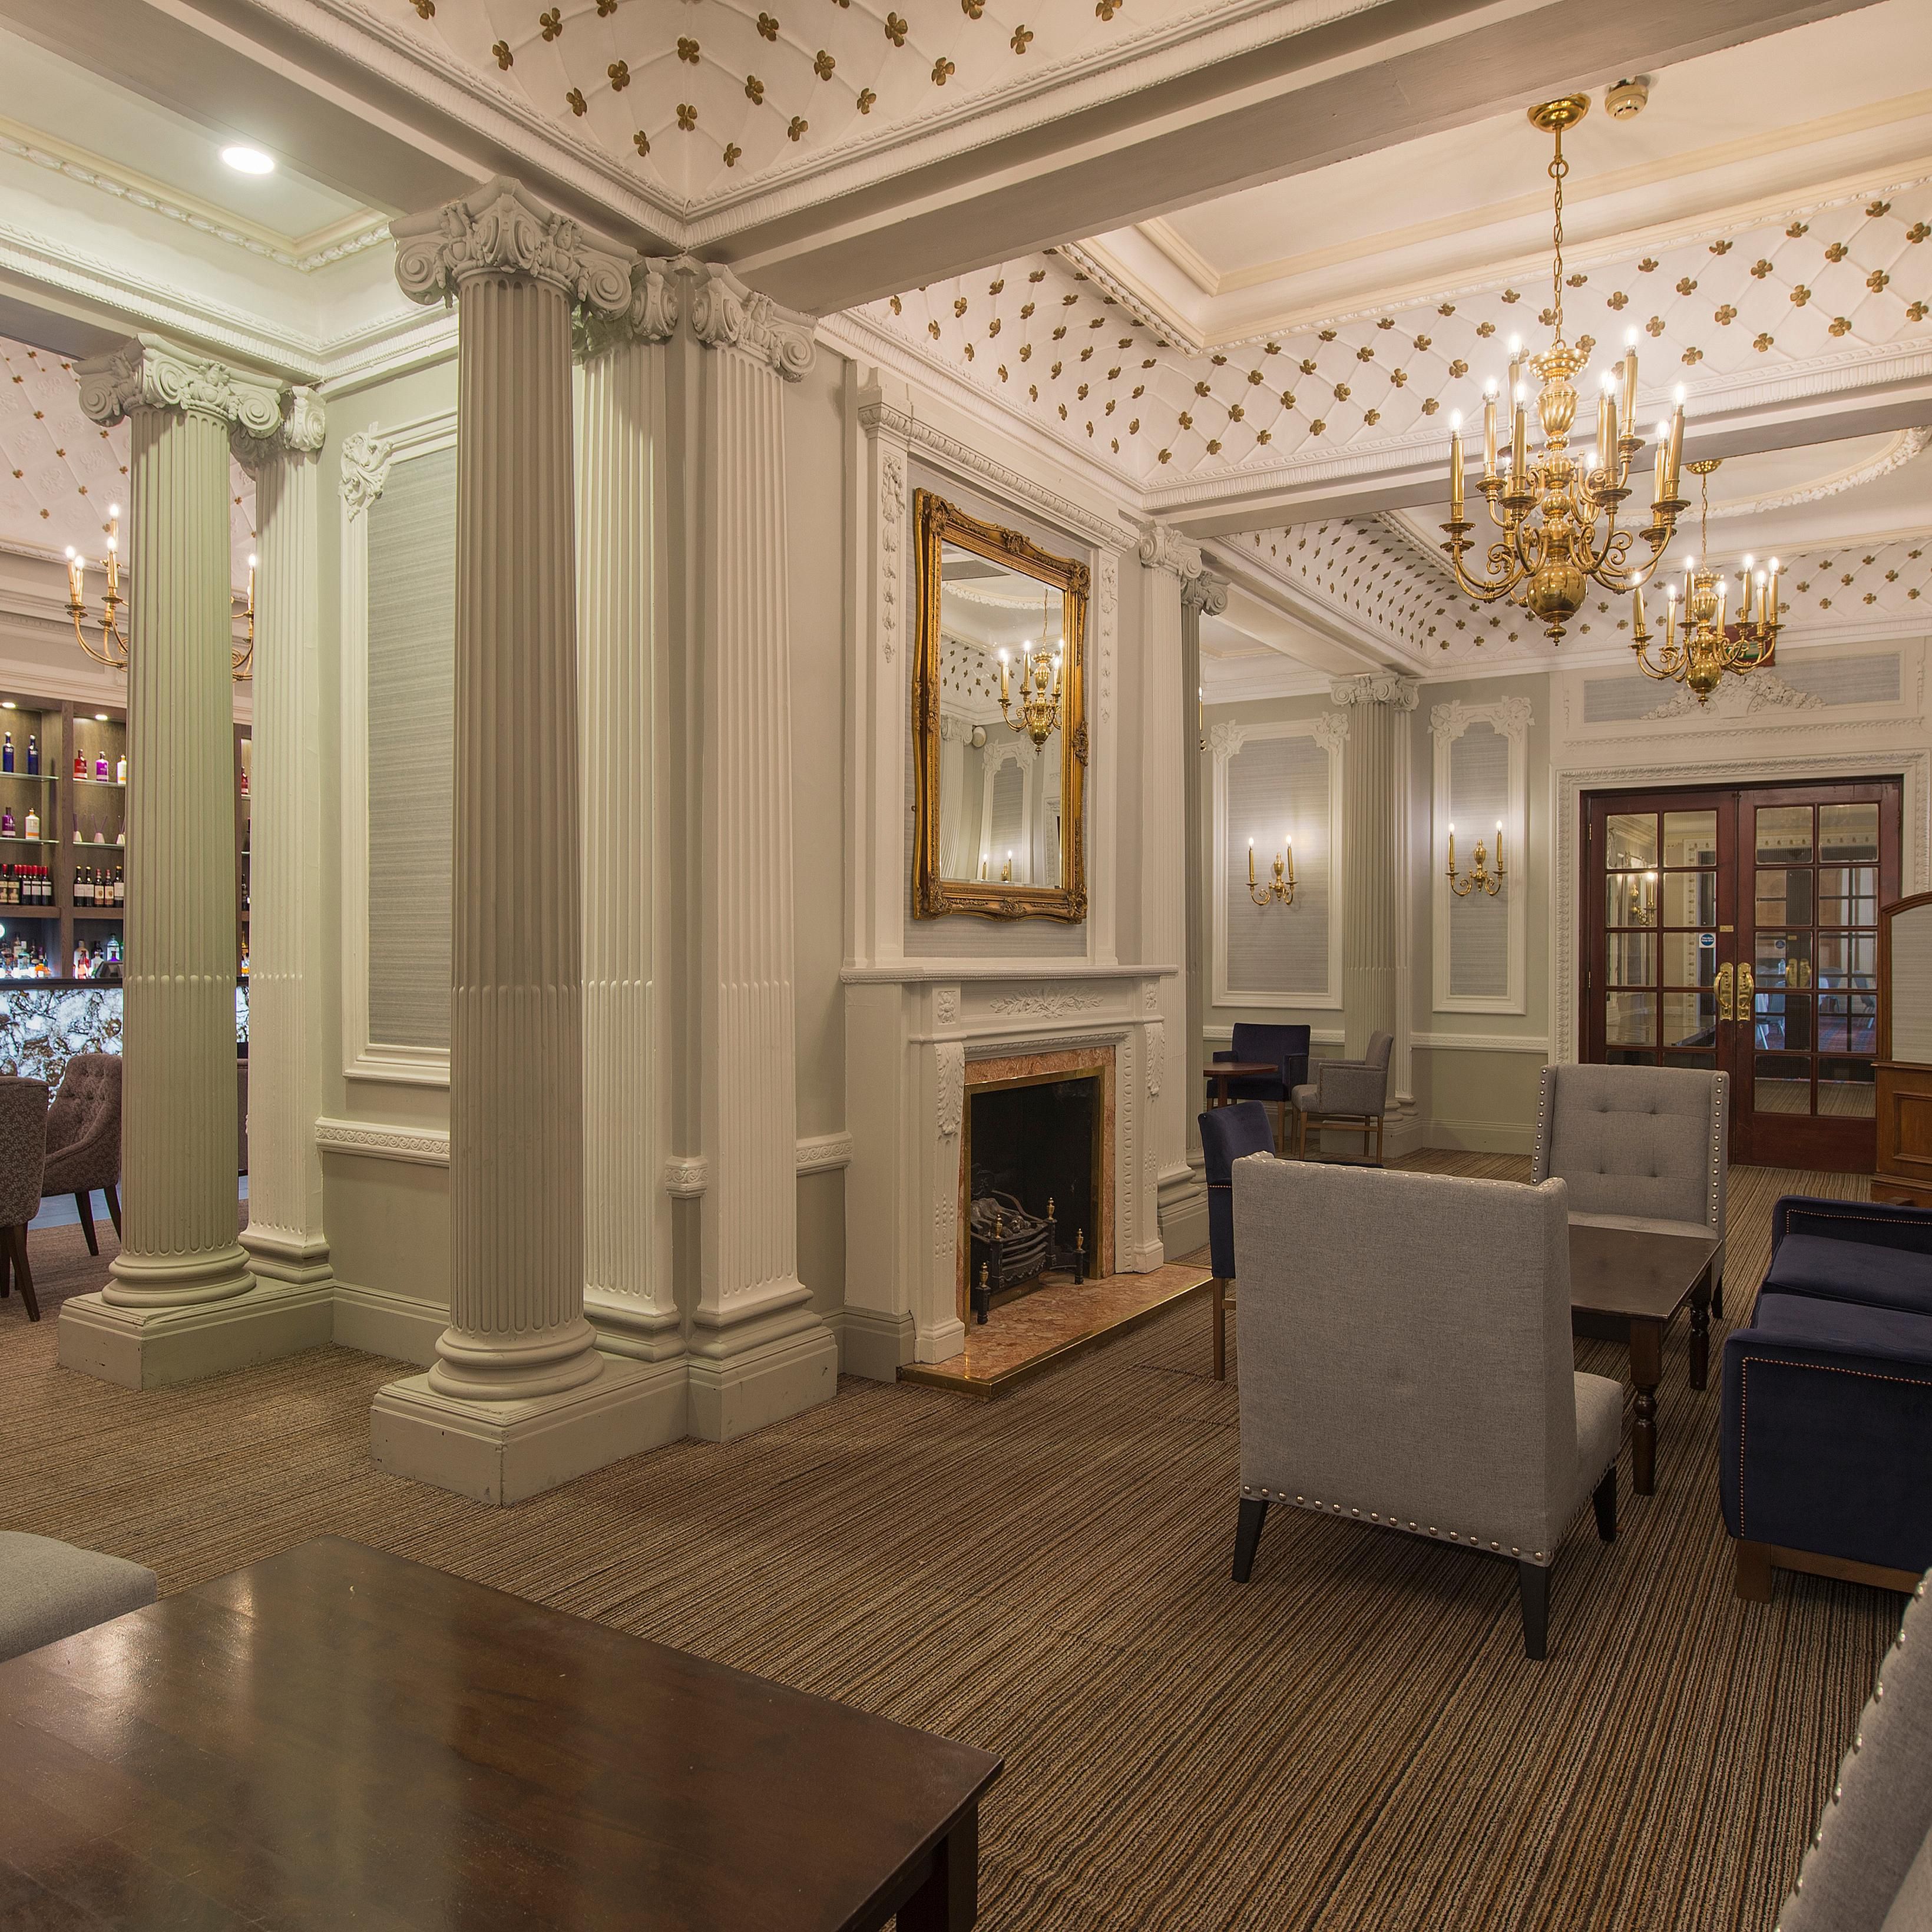 Relax and unwind in our Grand Lounge bar